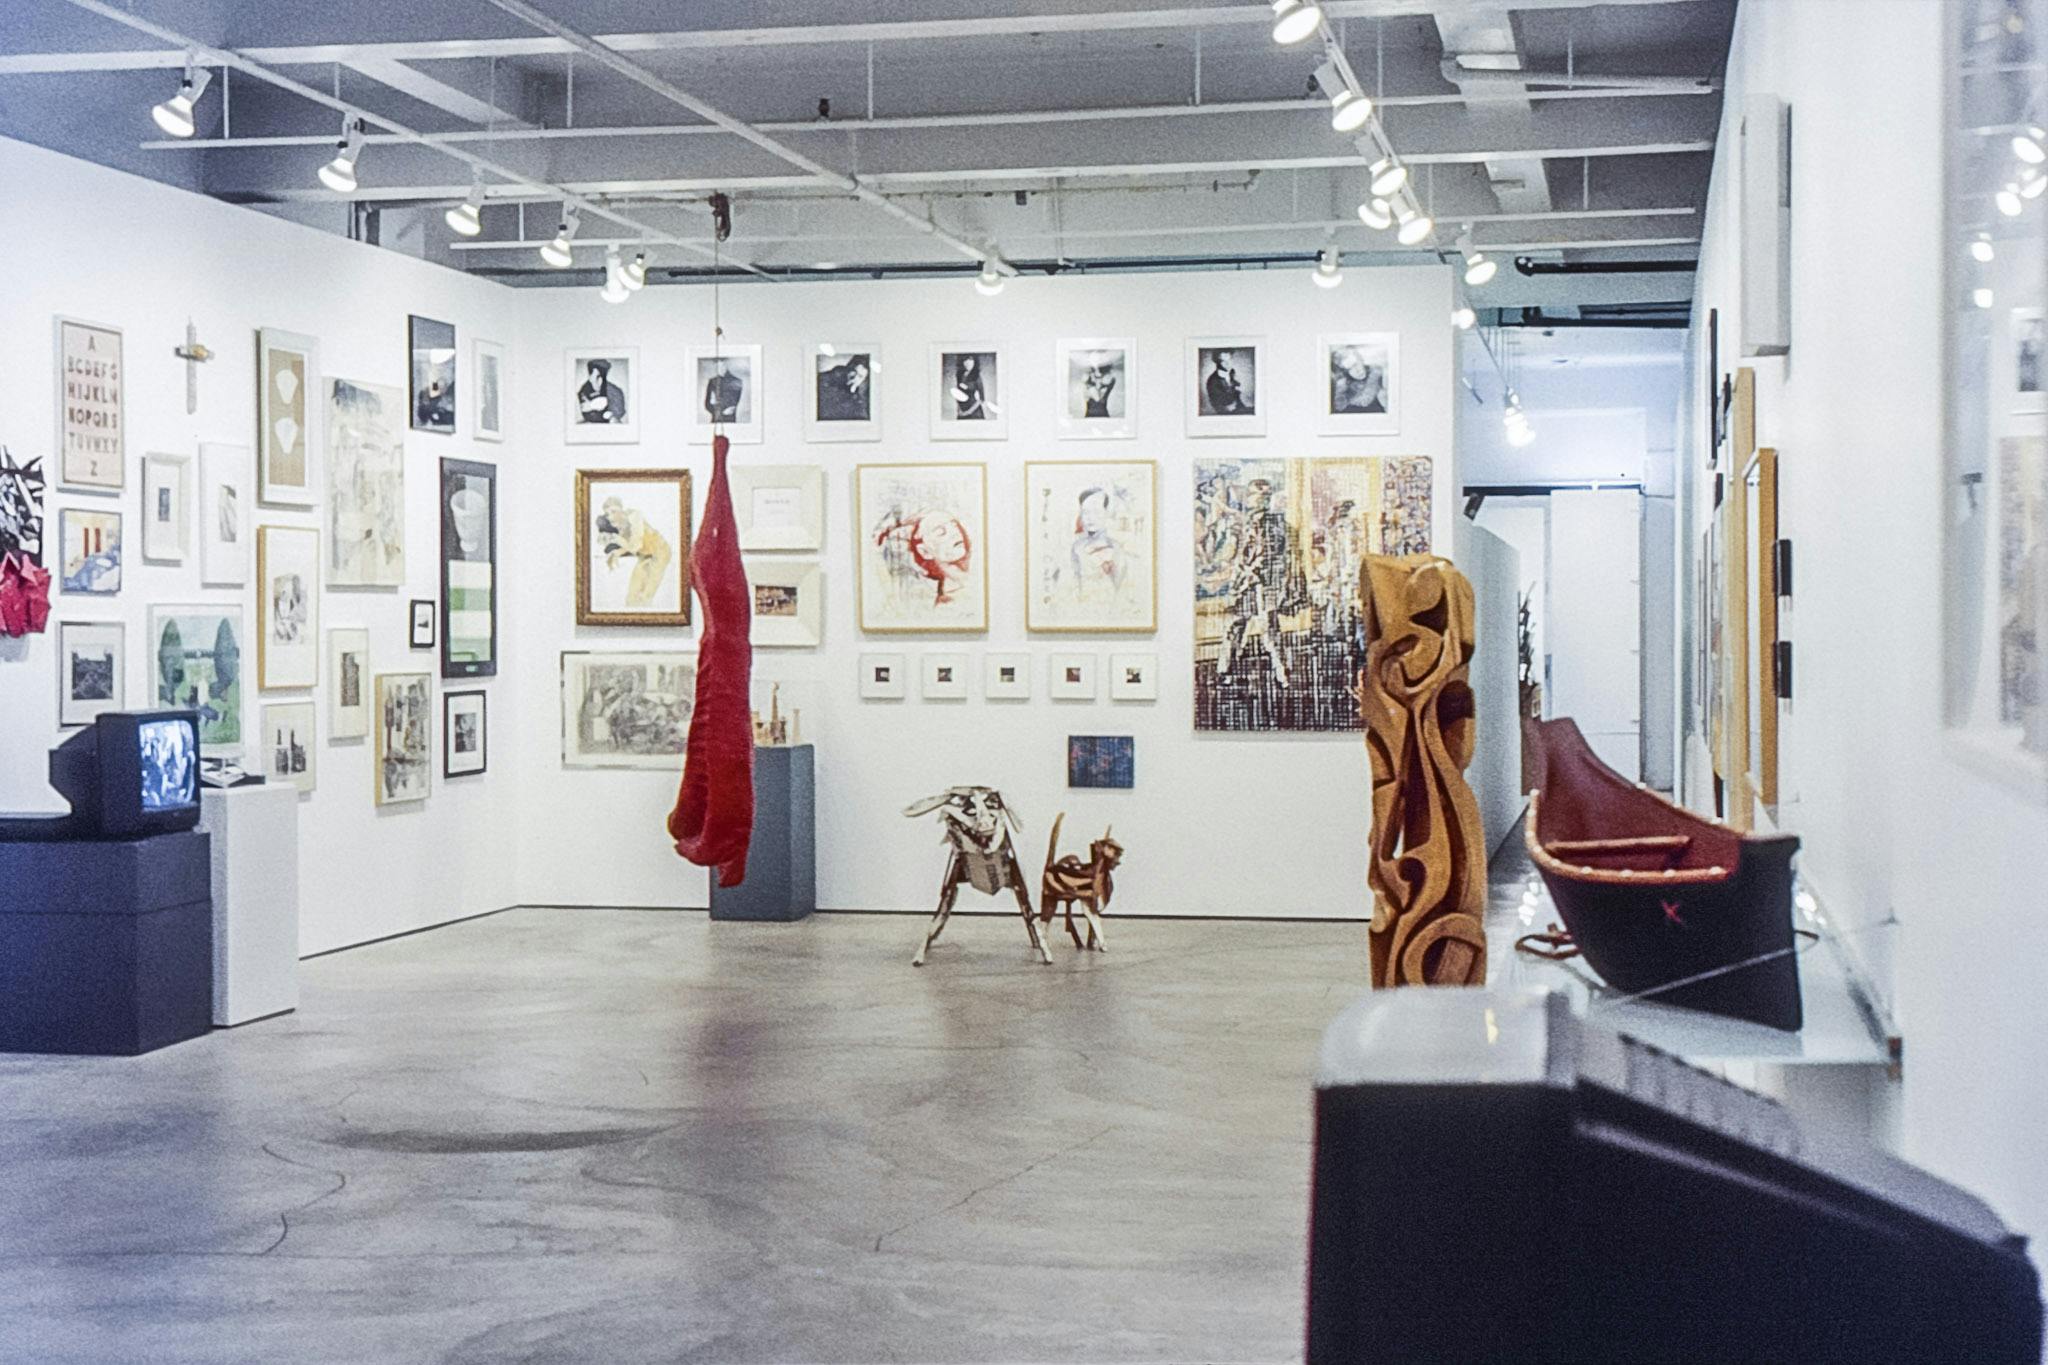 A photo of various artworks installed close to each other in the gallery. On the floor, there are two TVs playing video works, one canoe, a wooden abstract statue, and a dog and a cat made with metal.